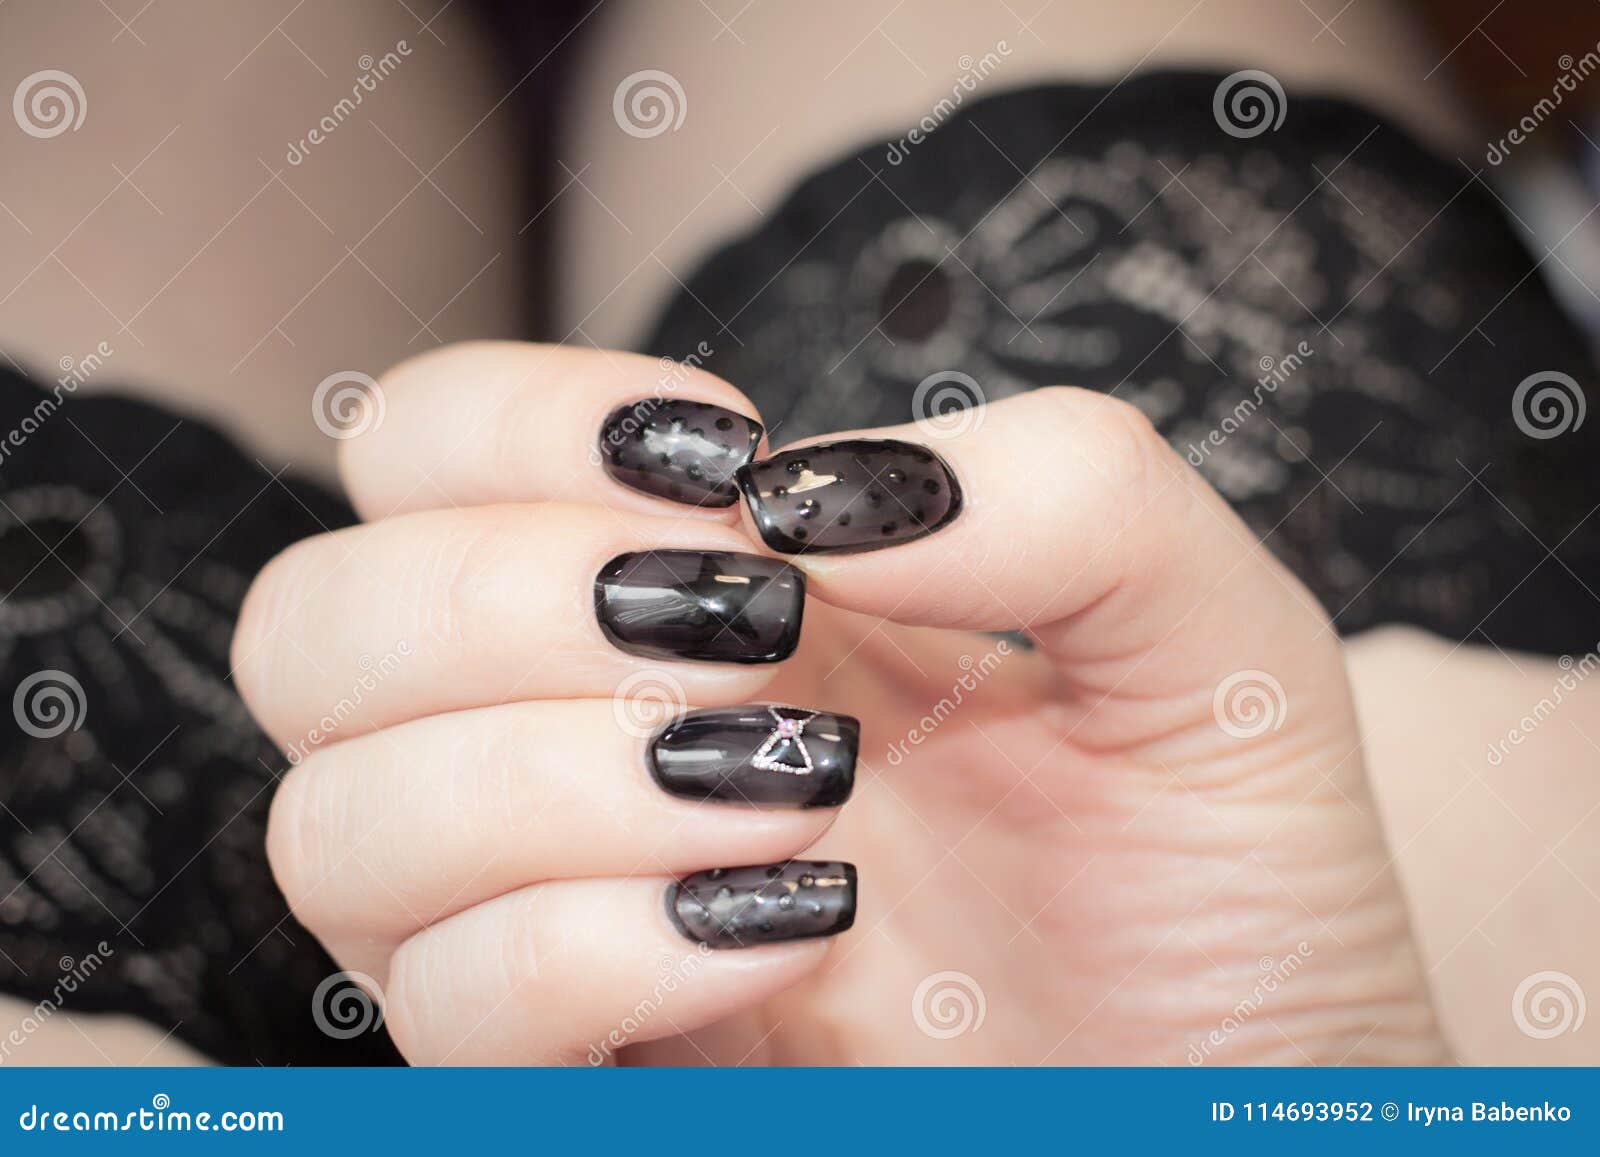 Manicure is Similar To Black Stockings Stock Photo - Image of dotted,  drawing: 114693952